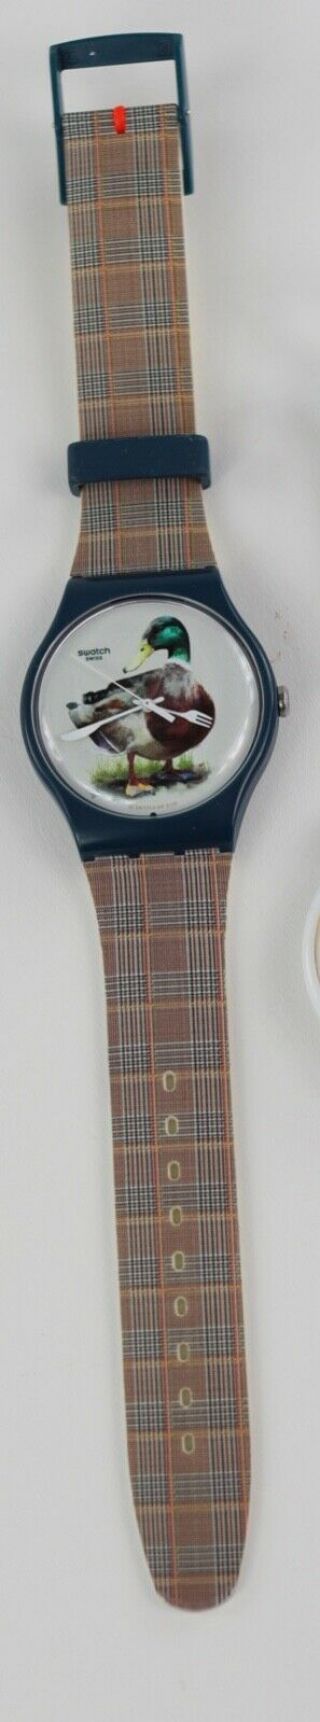 Unisex Swatch Duck - Issime Watch 2015 Special Edition Rare Euc Usa Seller